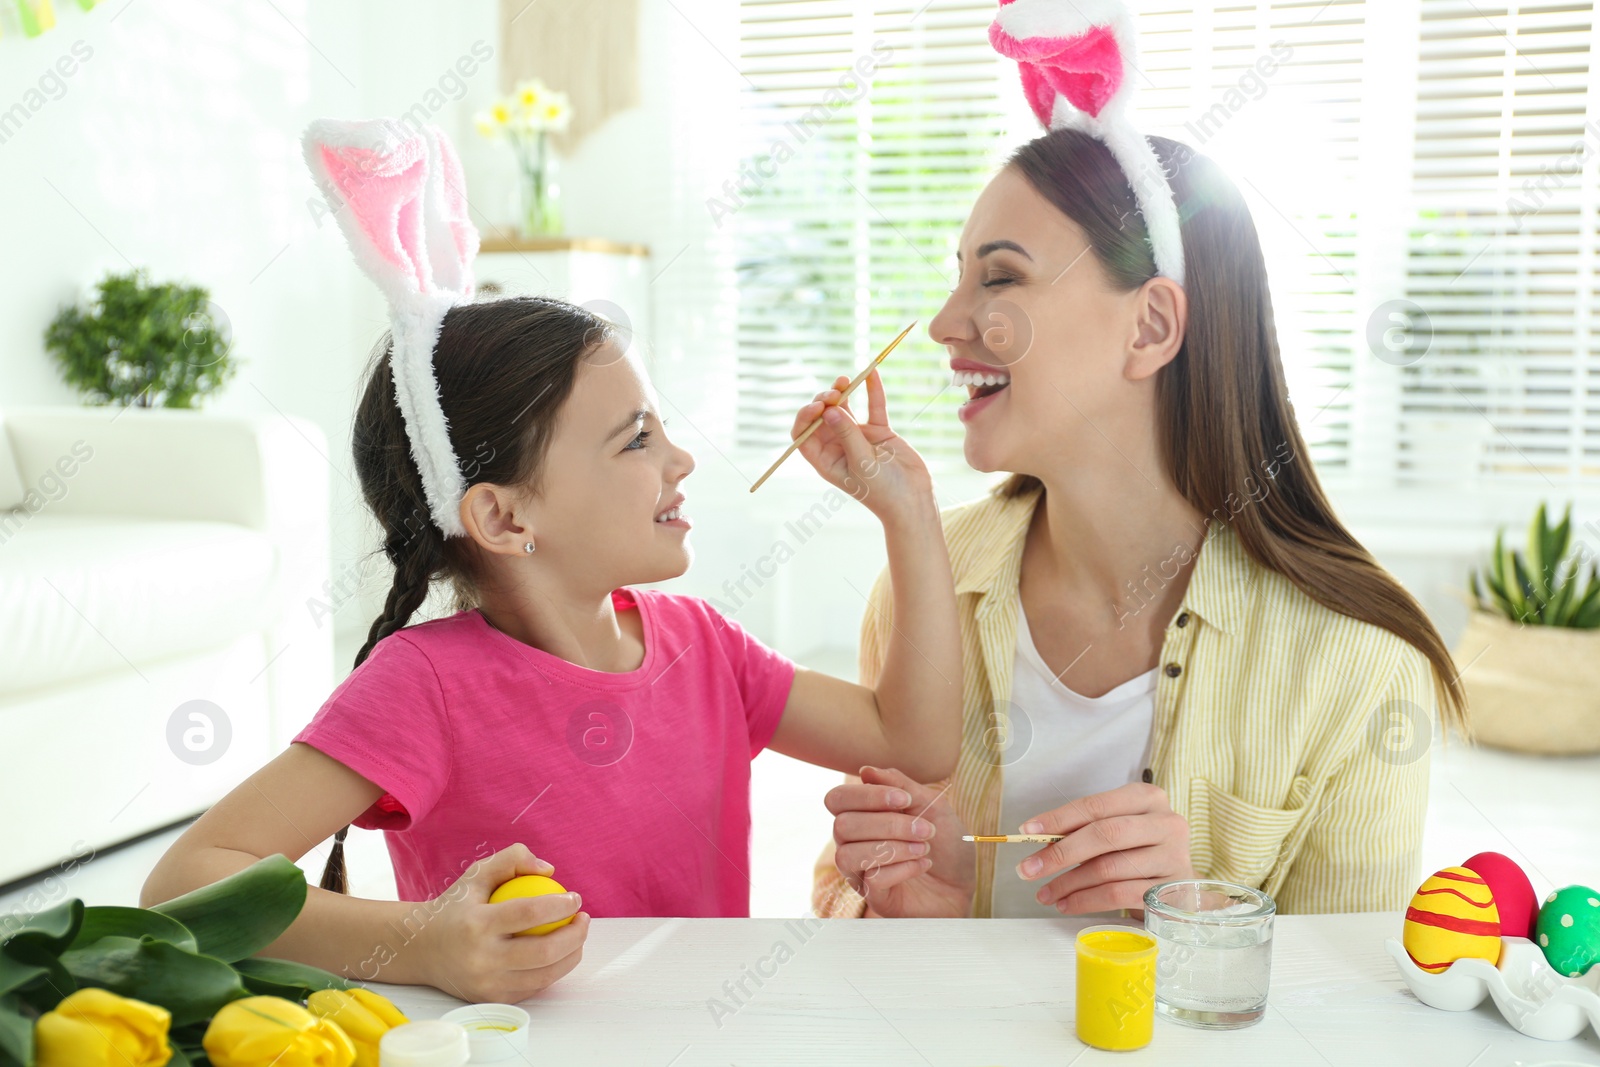 Photo of Happy mother and daughter with bunny ears headbands having fun while painting Easter egg at home